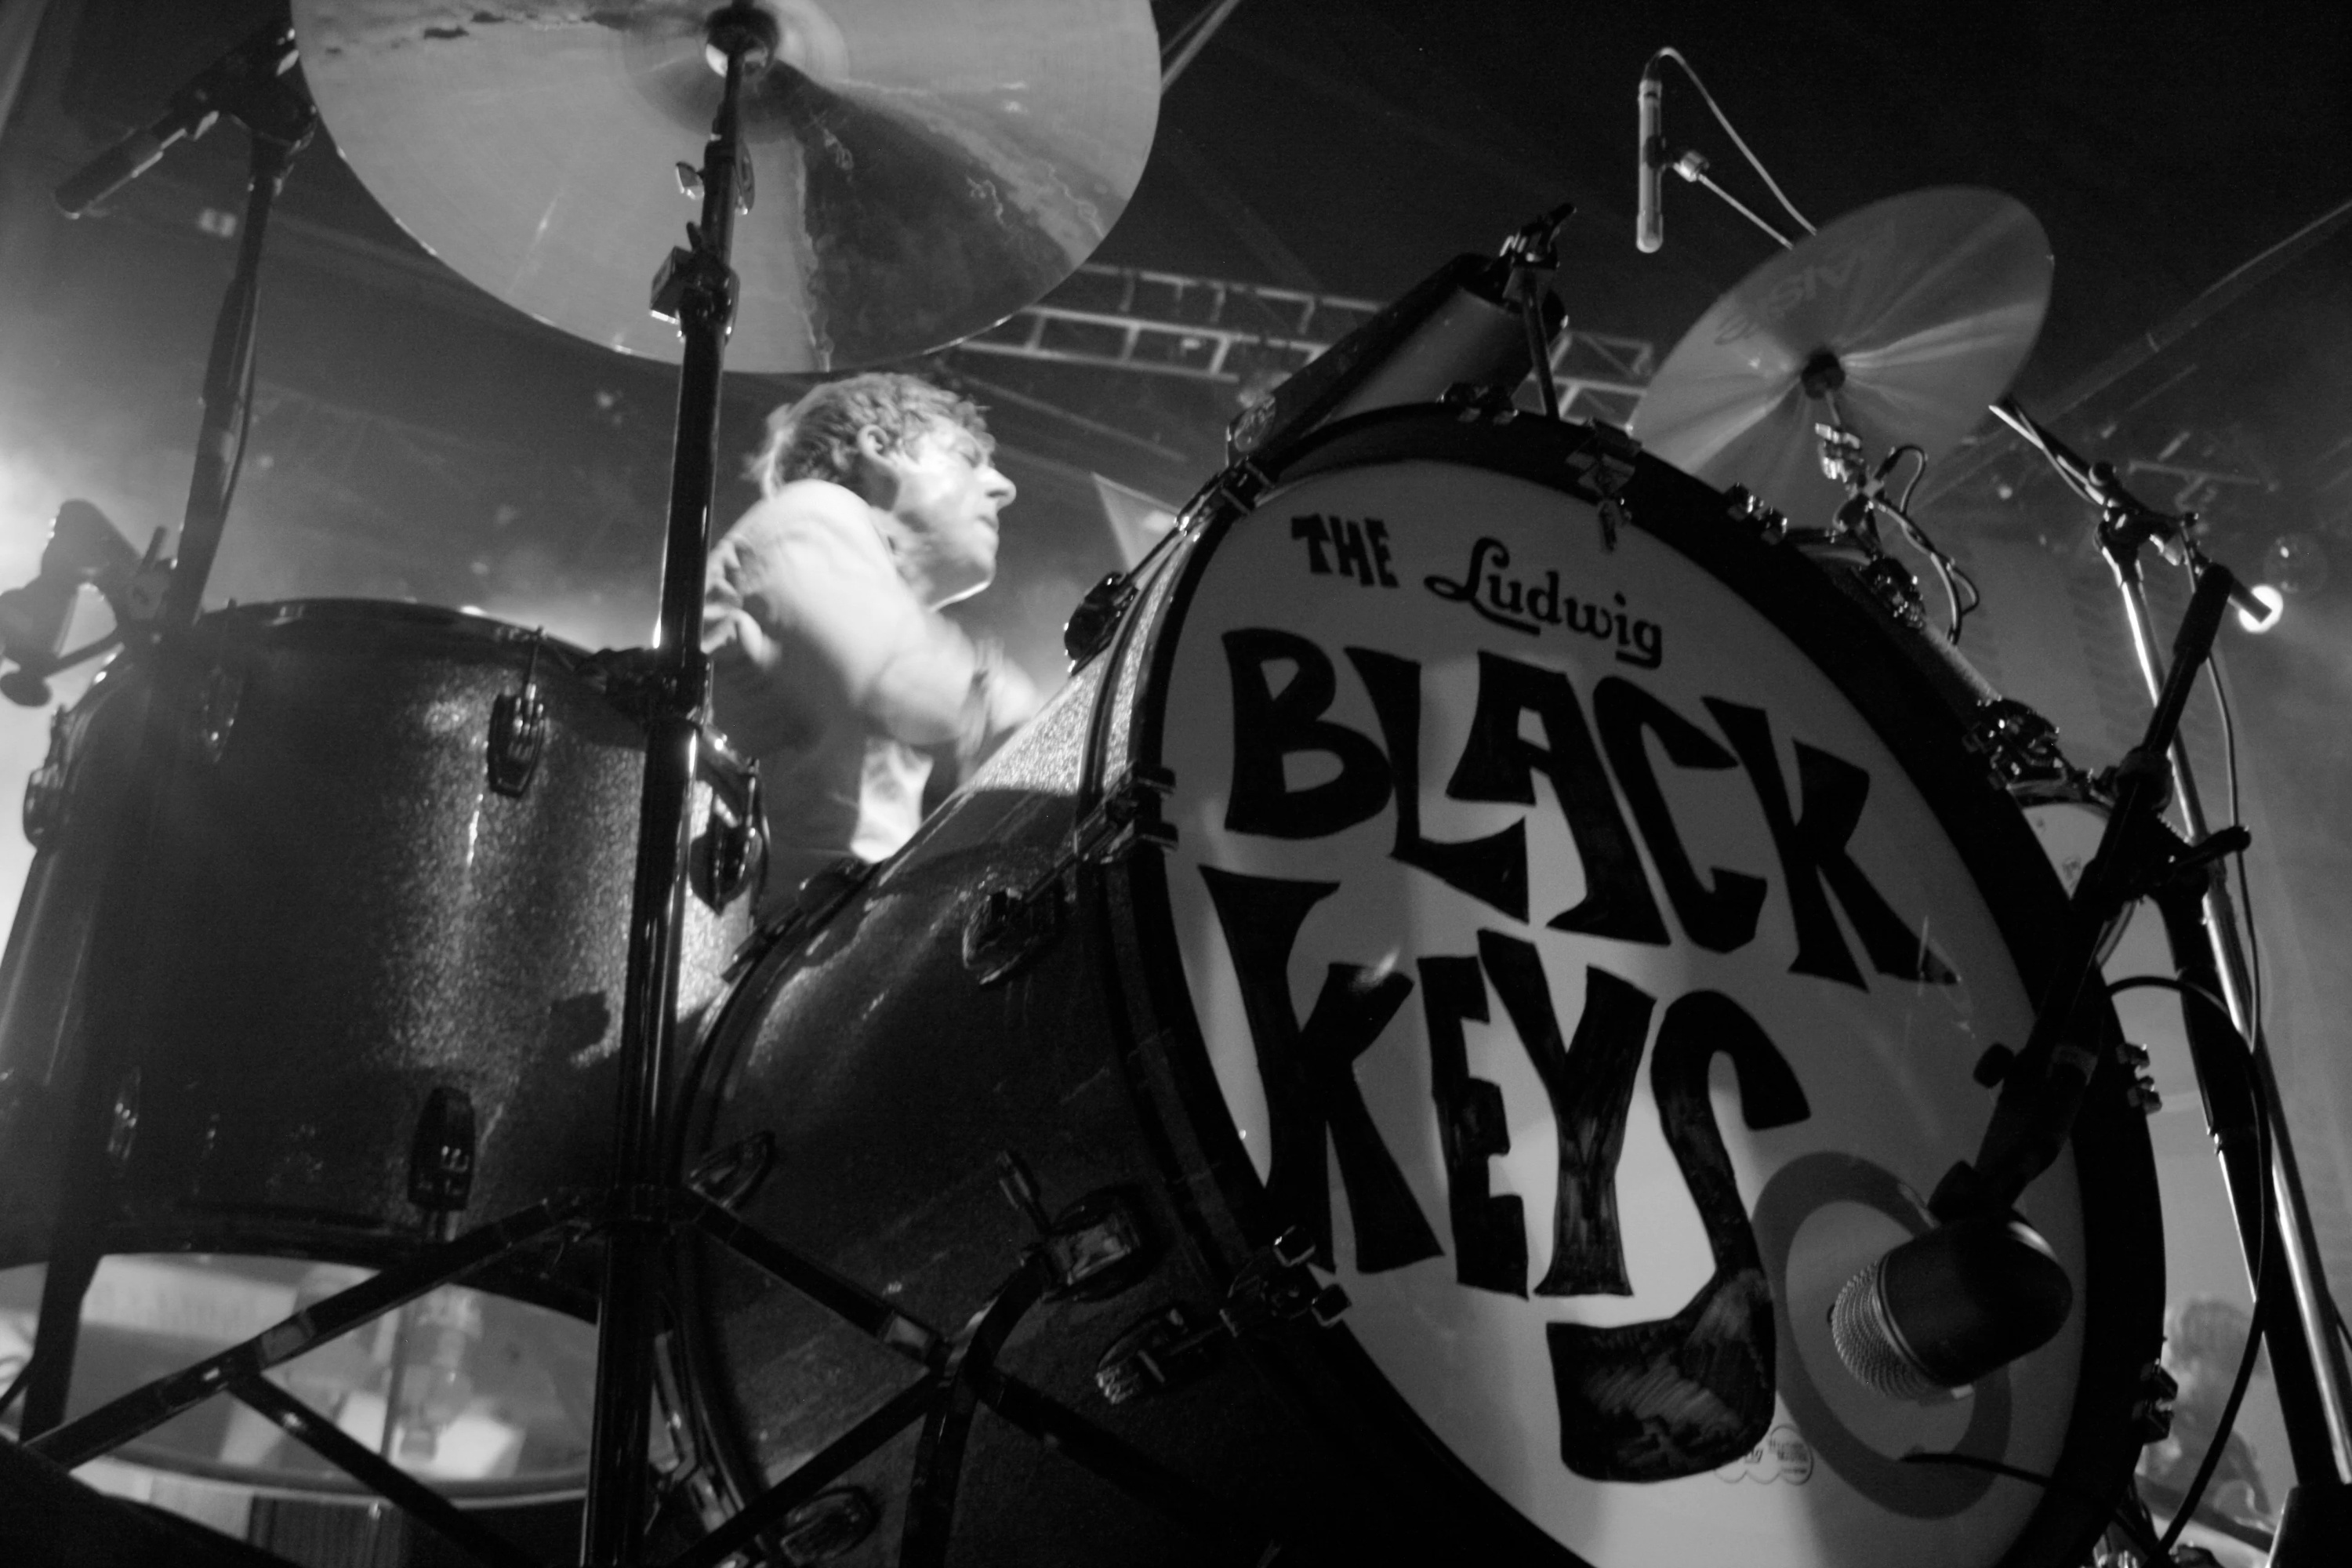 The Black Keys HD wallpapers and backgrounds, High-quality visuals, Immersive experience, Appreciating the band's artistry, 3000x2000 HD Desktop